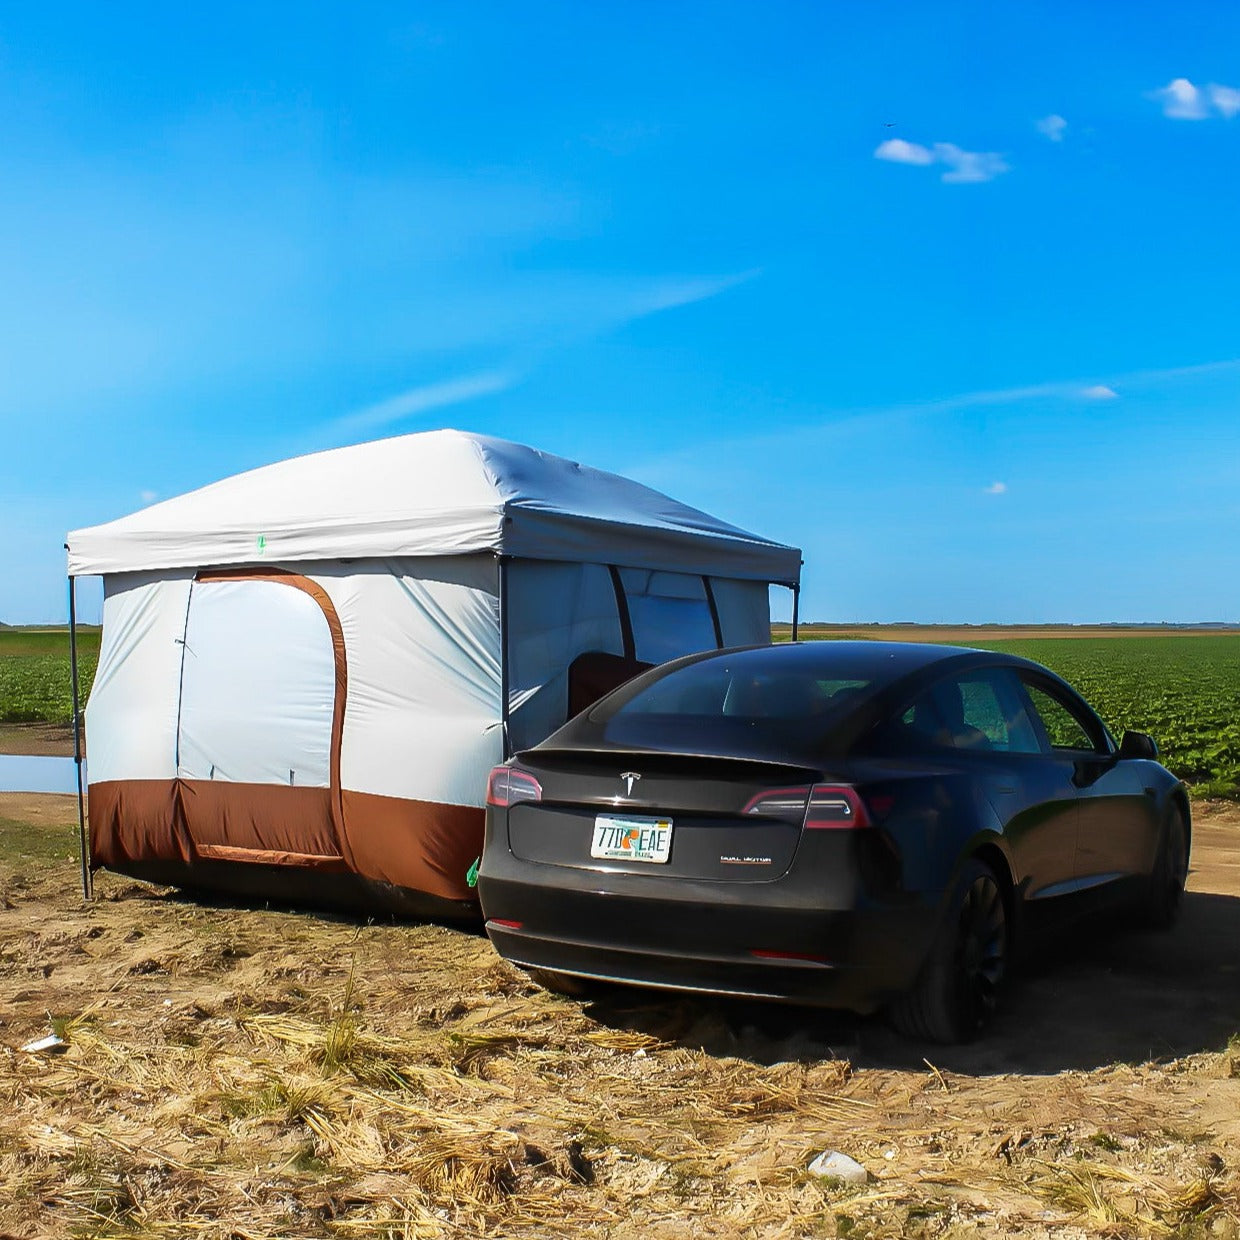 Our innovative E-Tent attaches to any Tesla's driver window, powering air conditioning with the car's AC unit. Lightweight, easy to set up, and suitable for various camping environments, it's made of durable, waterproof material. The spacious interior comfortably fits two people and includes a built-in power outlet for charging devices while camping.